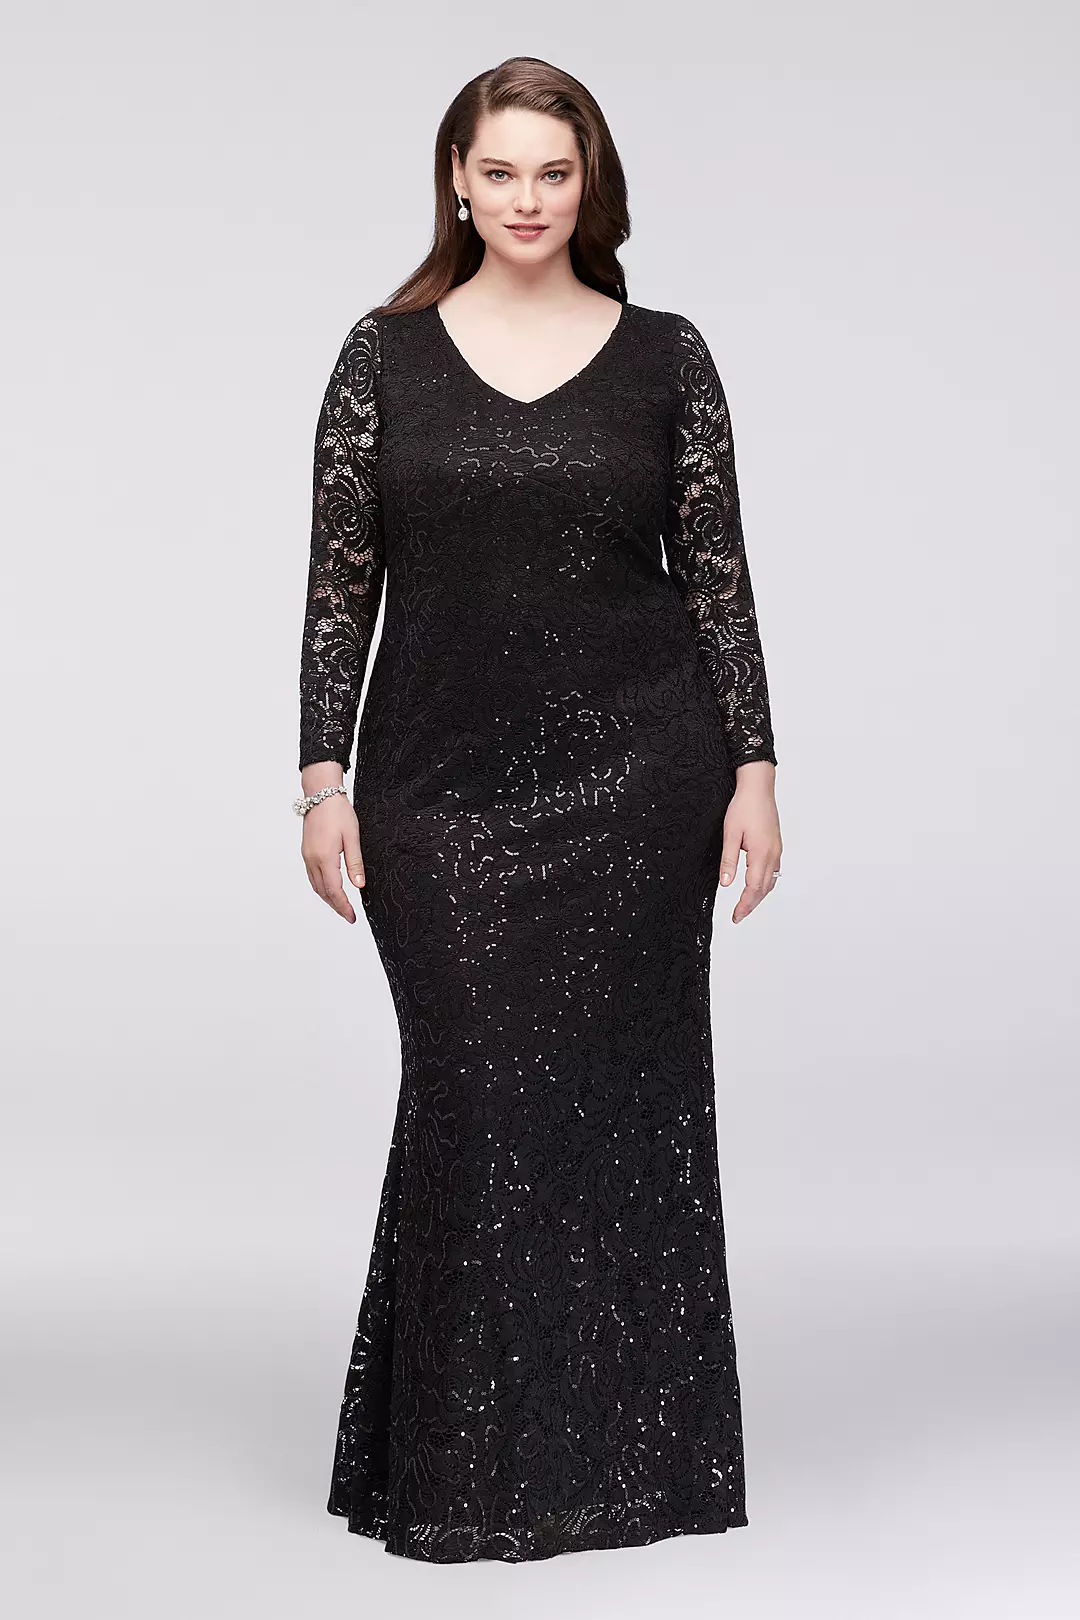 Long Sleeve Lace Plus Size Gown with Keyhole Back Image